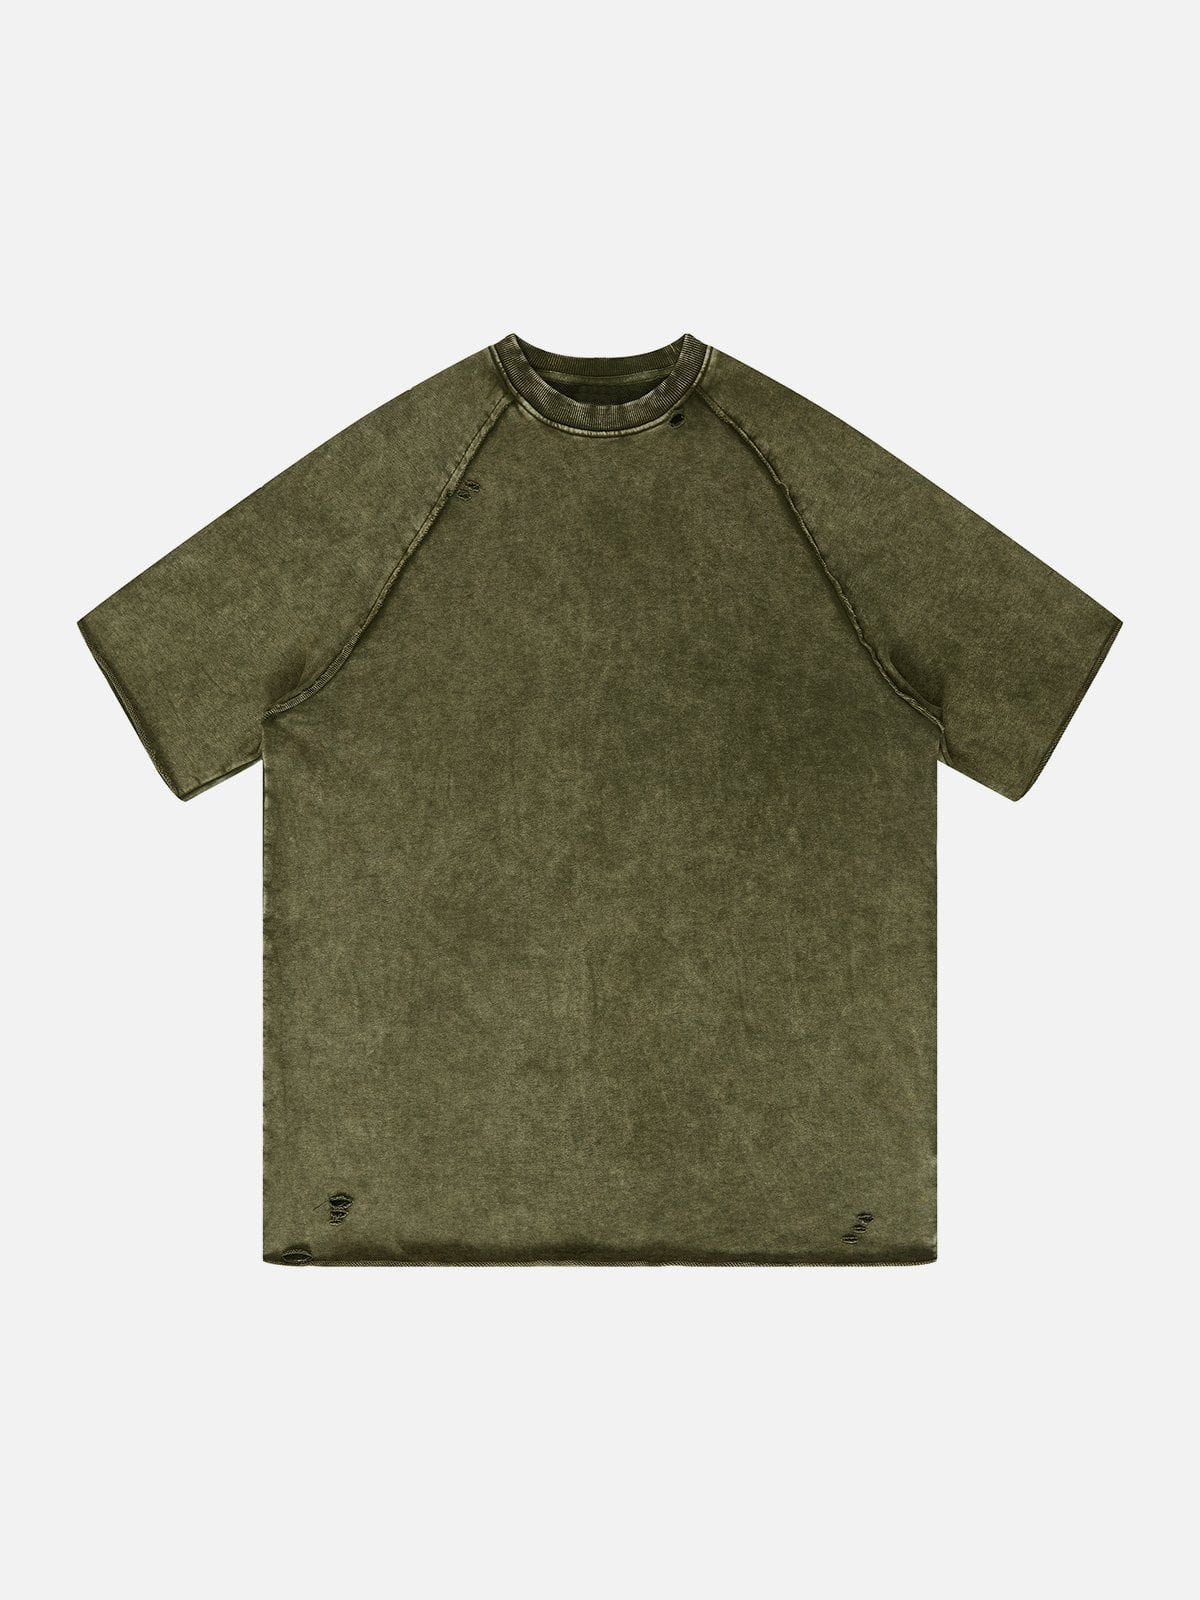 Sneakerland™ - Solid Washed Essential Tee